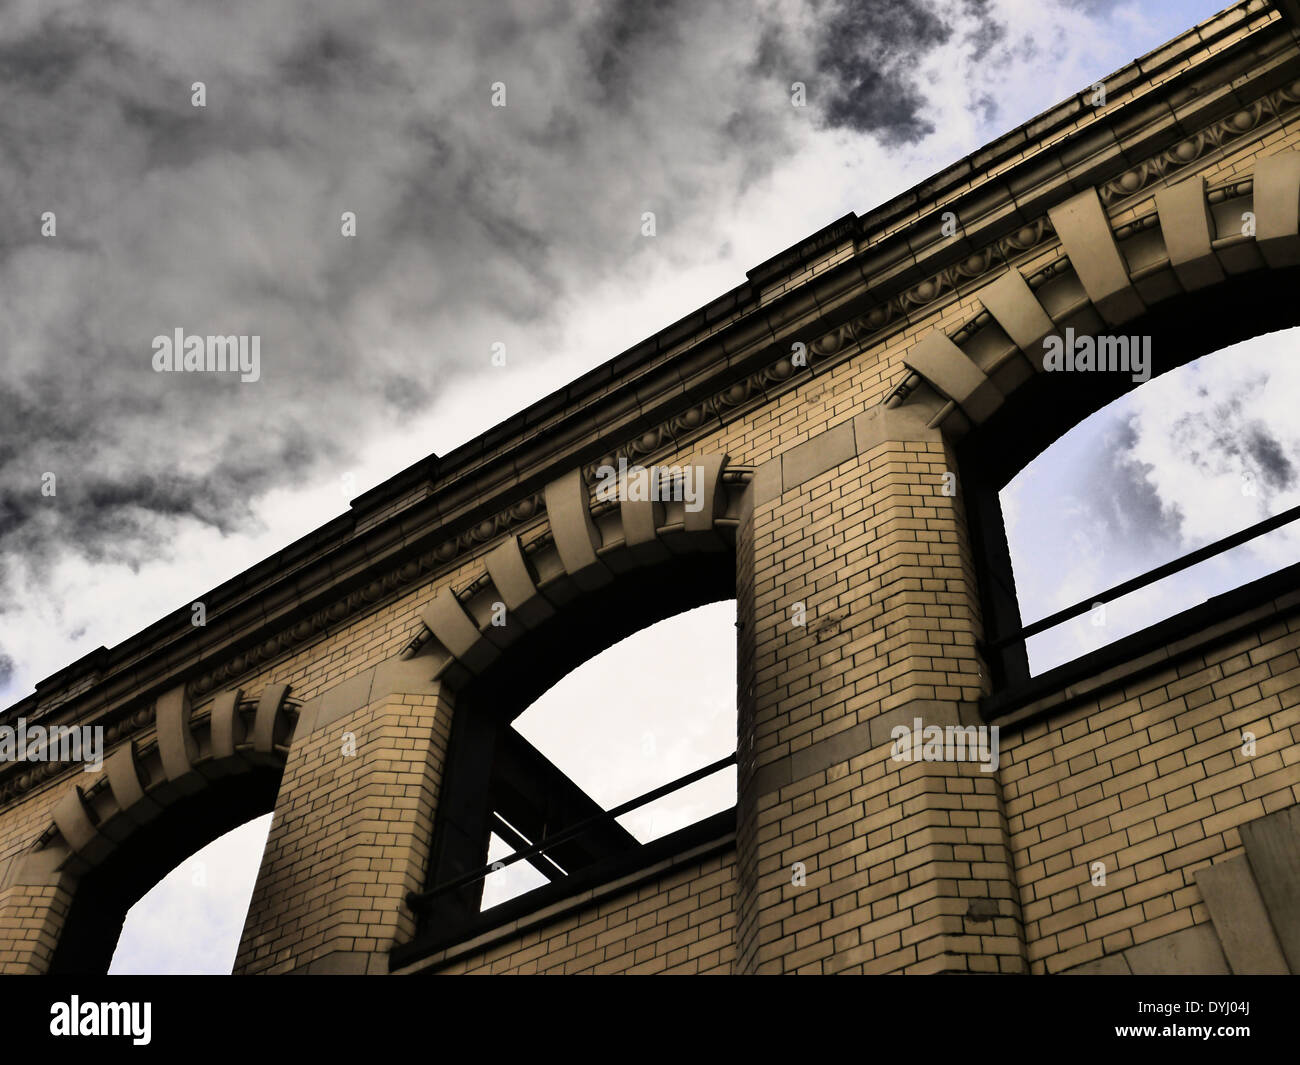 Creative image of architecture / architectural aspects of semi-derelict art-deco type building, Newcastle upon Tyne, England, UK Stock Photo